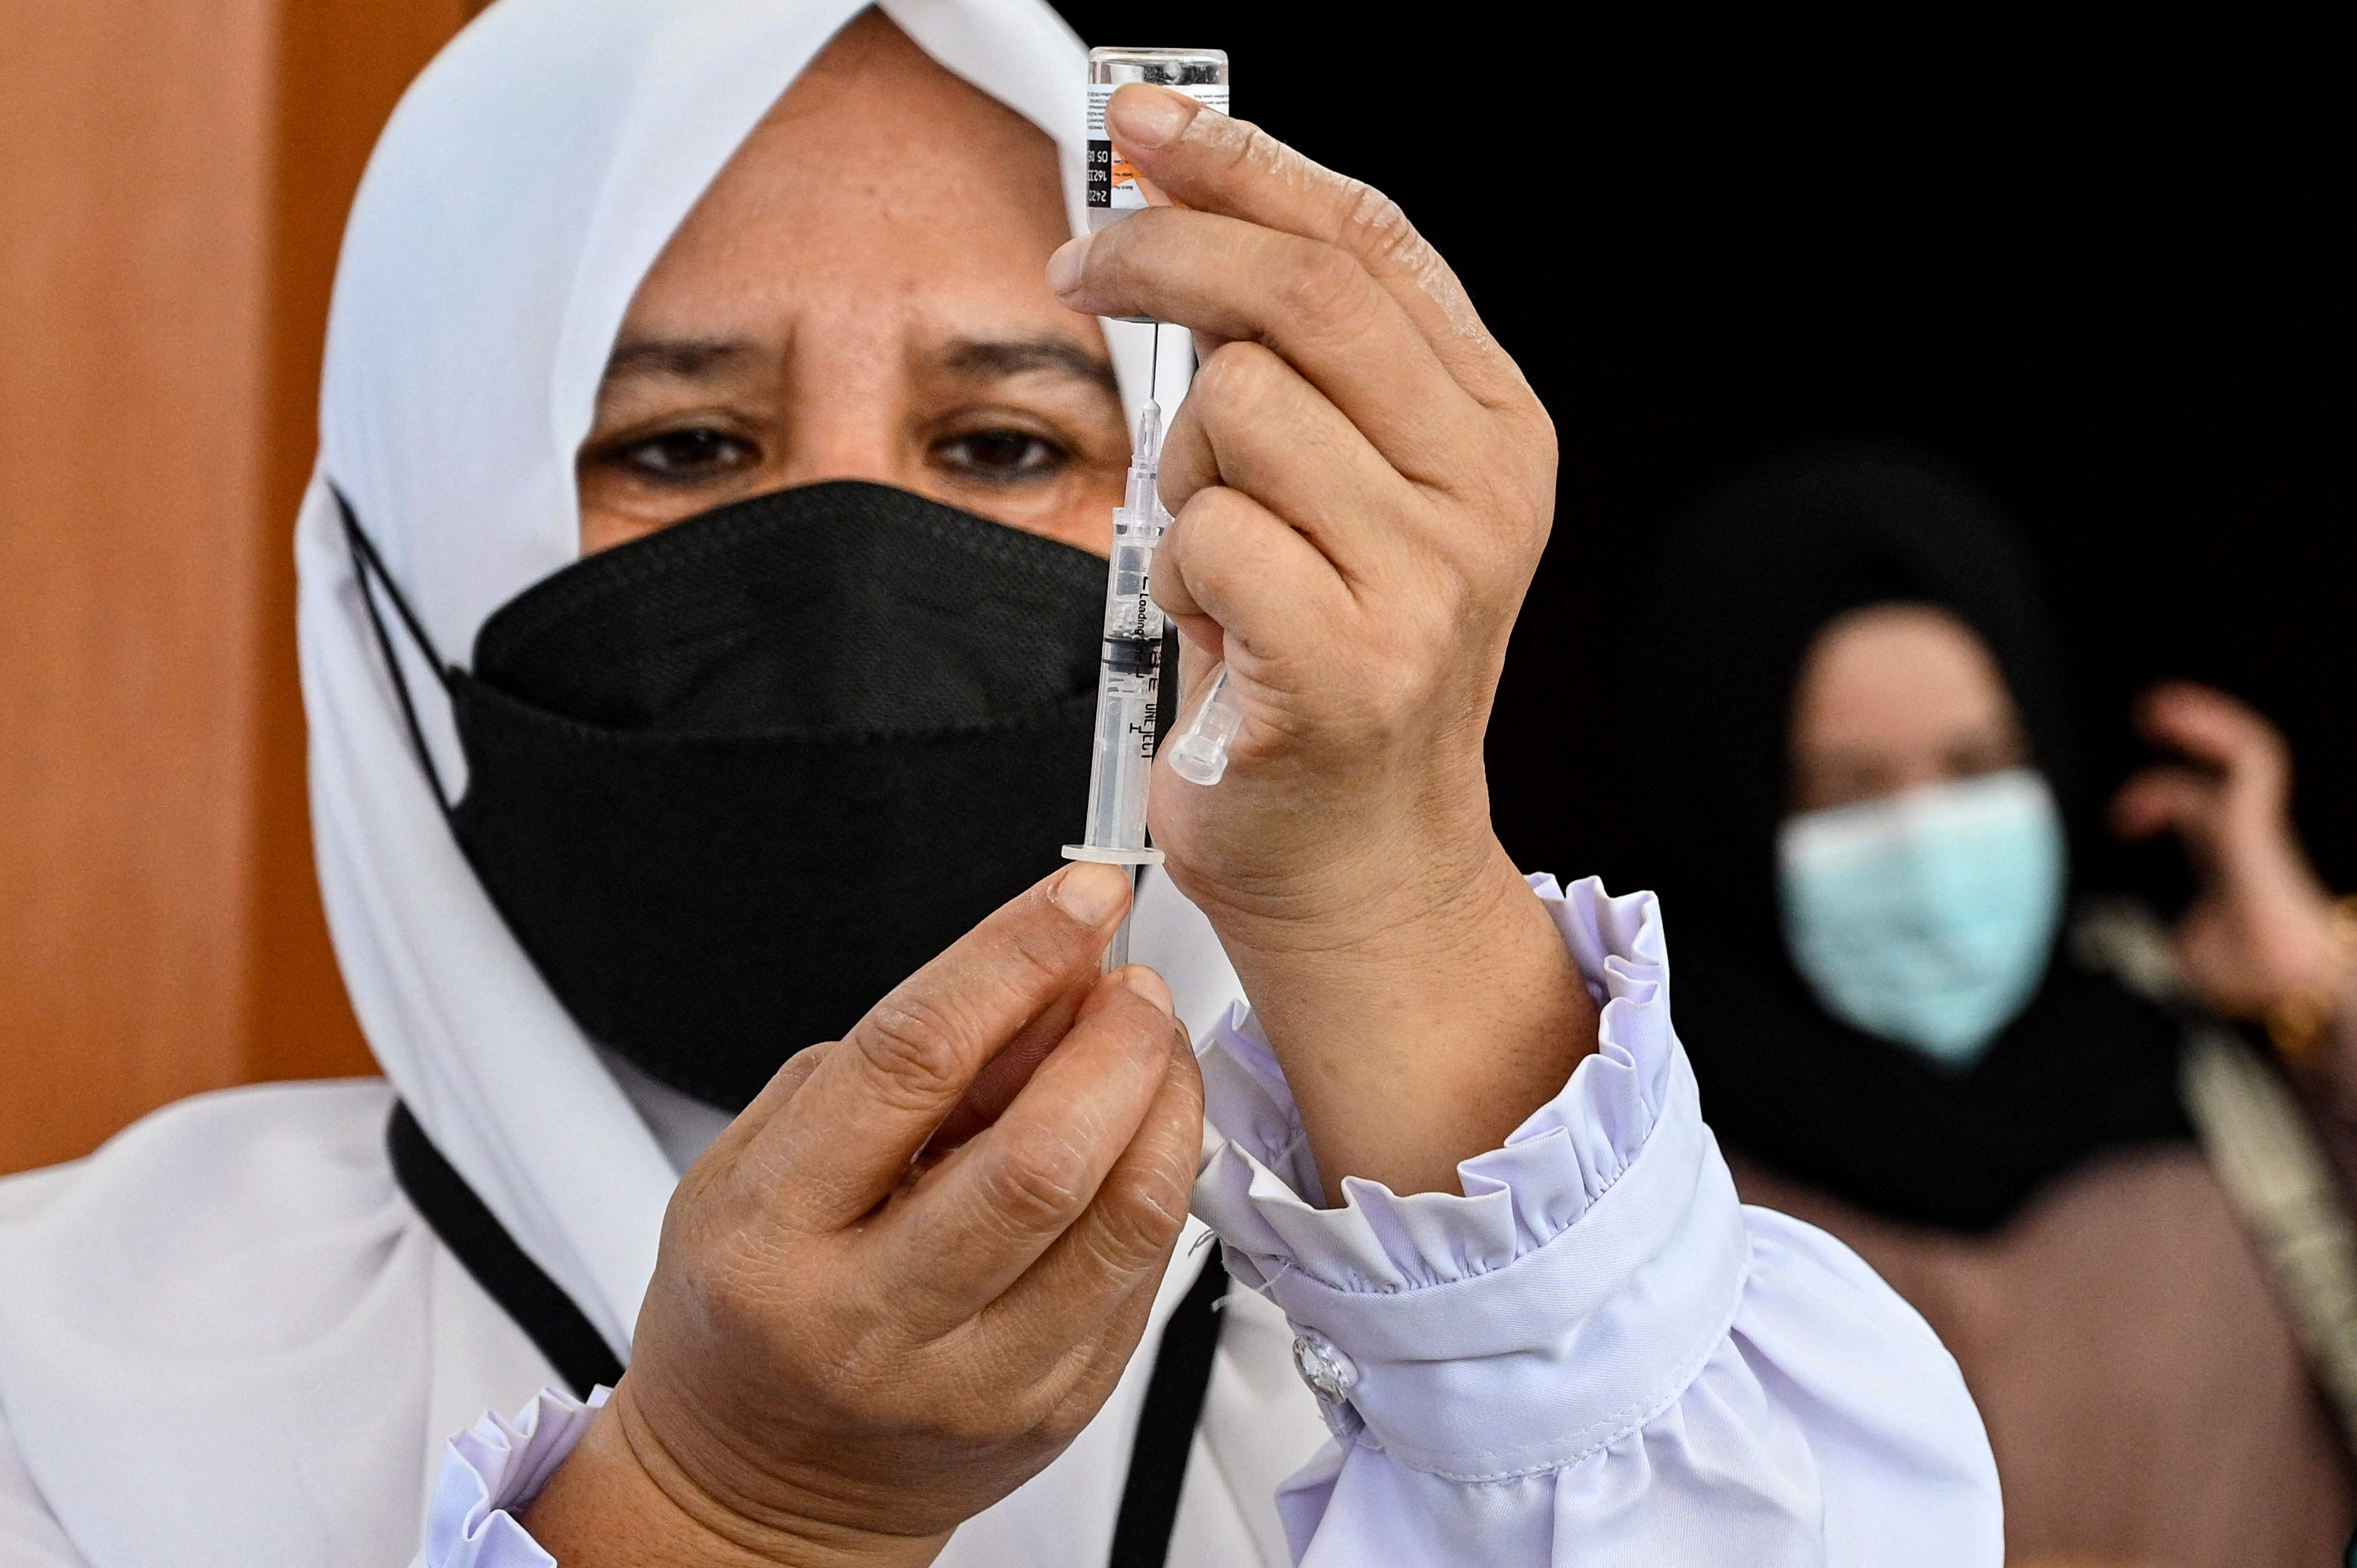 An Indonesian health worker prepares a dose of Covid-19 vaccine in Banda Aceh. Photo: AFP